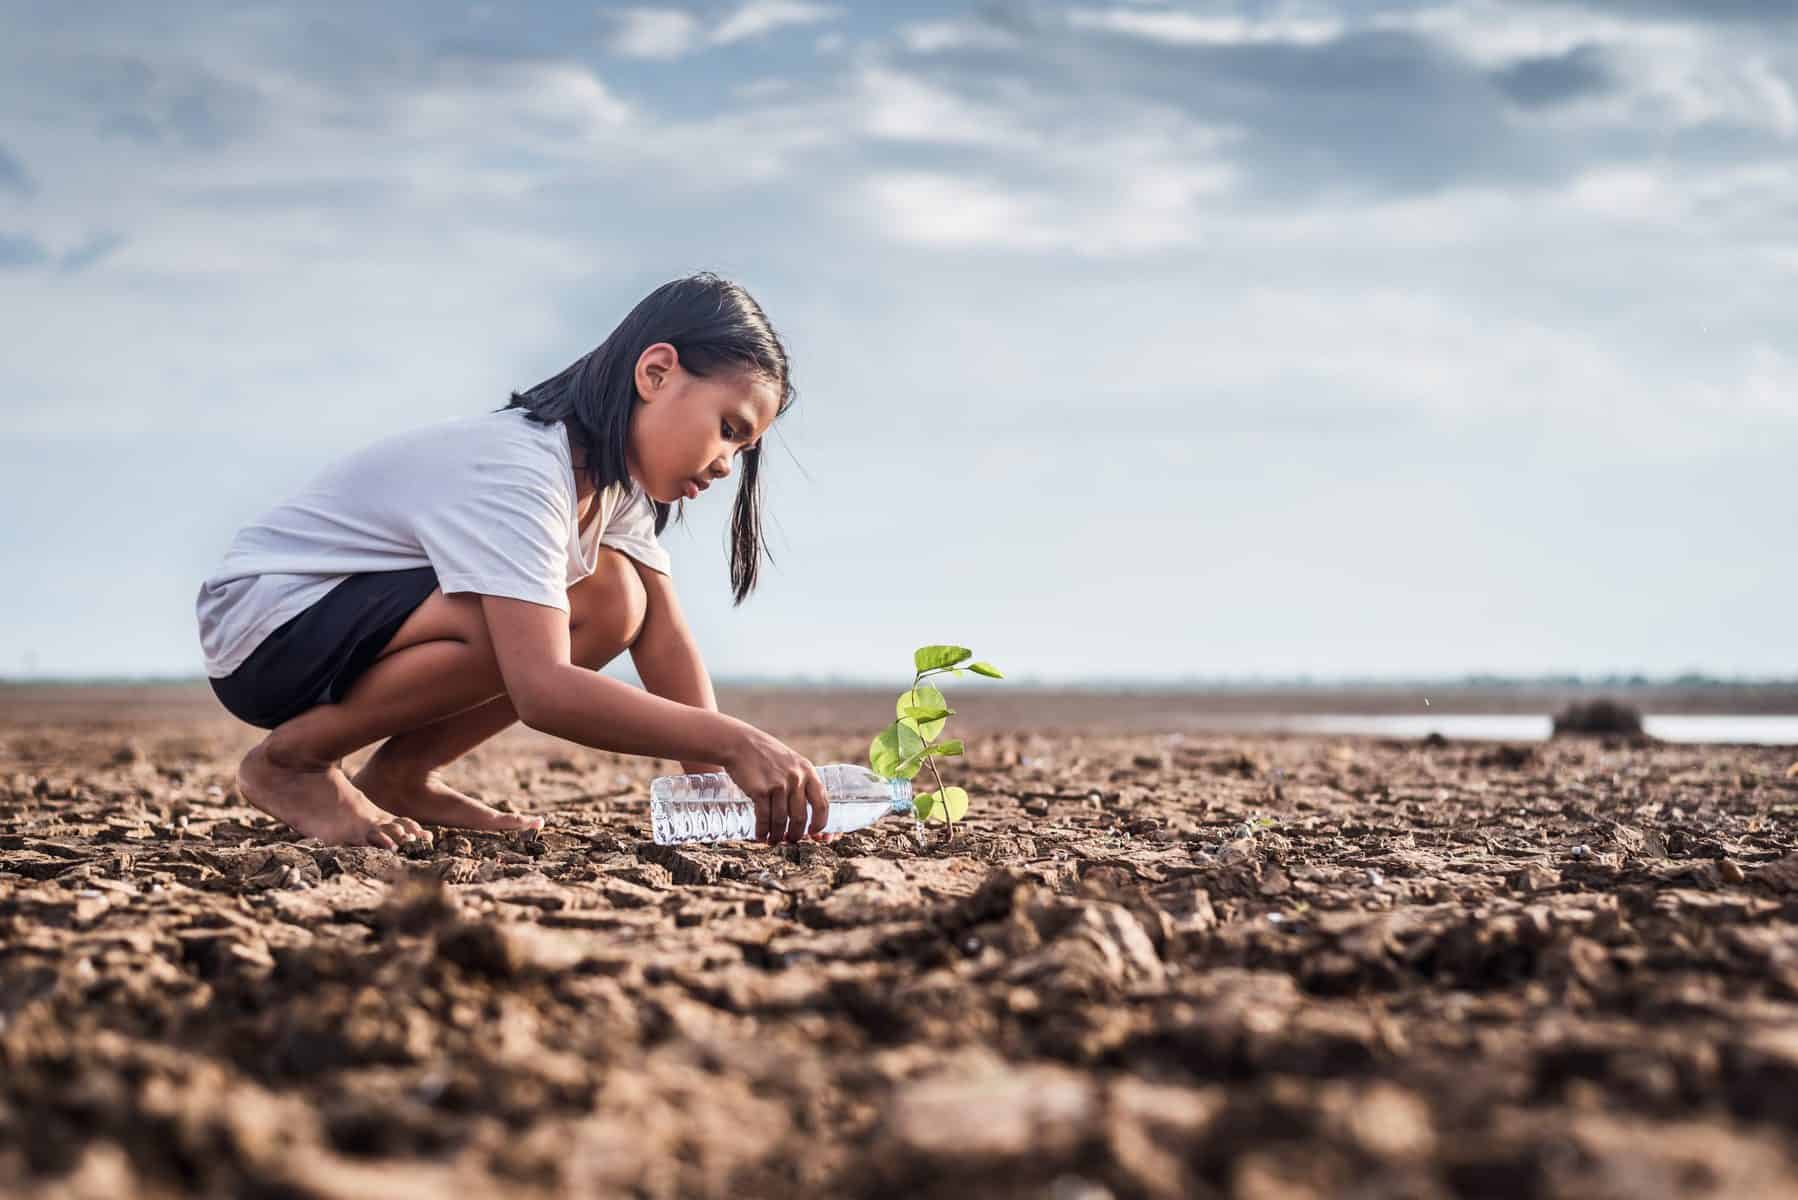 Young girl watering plant